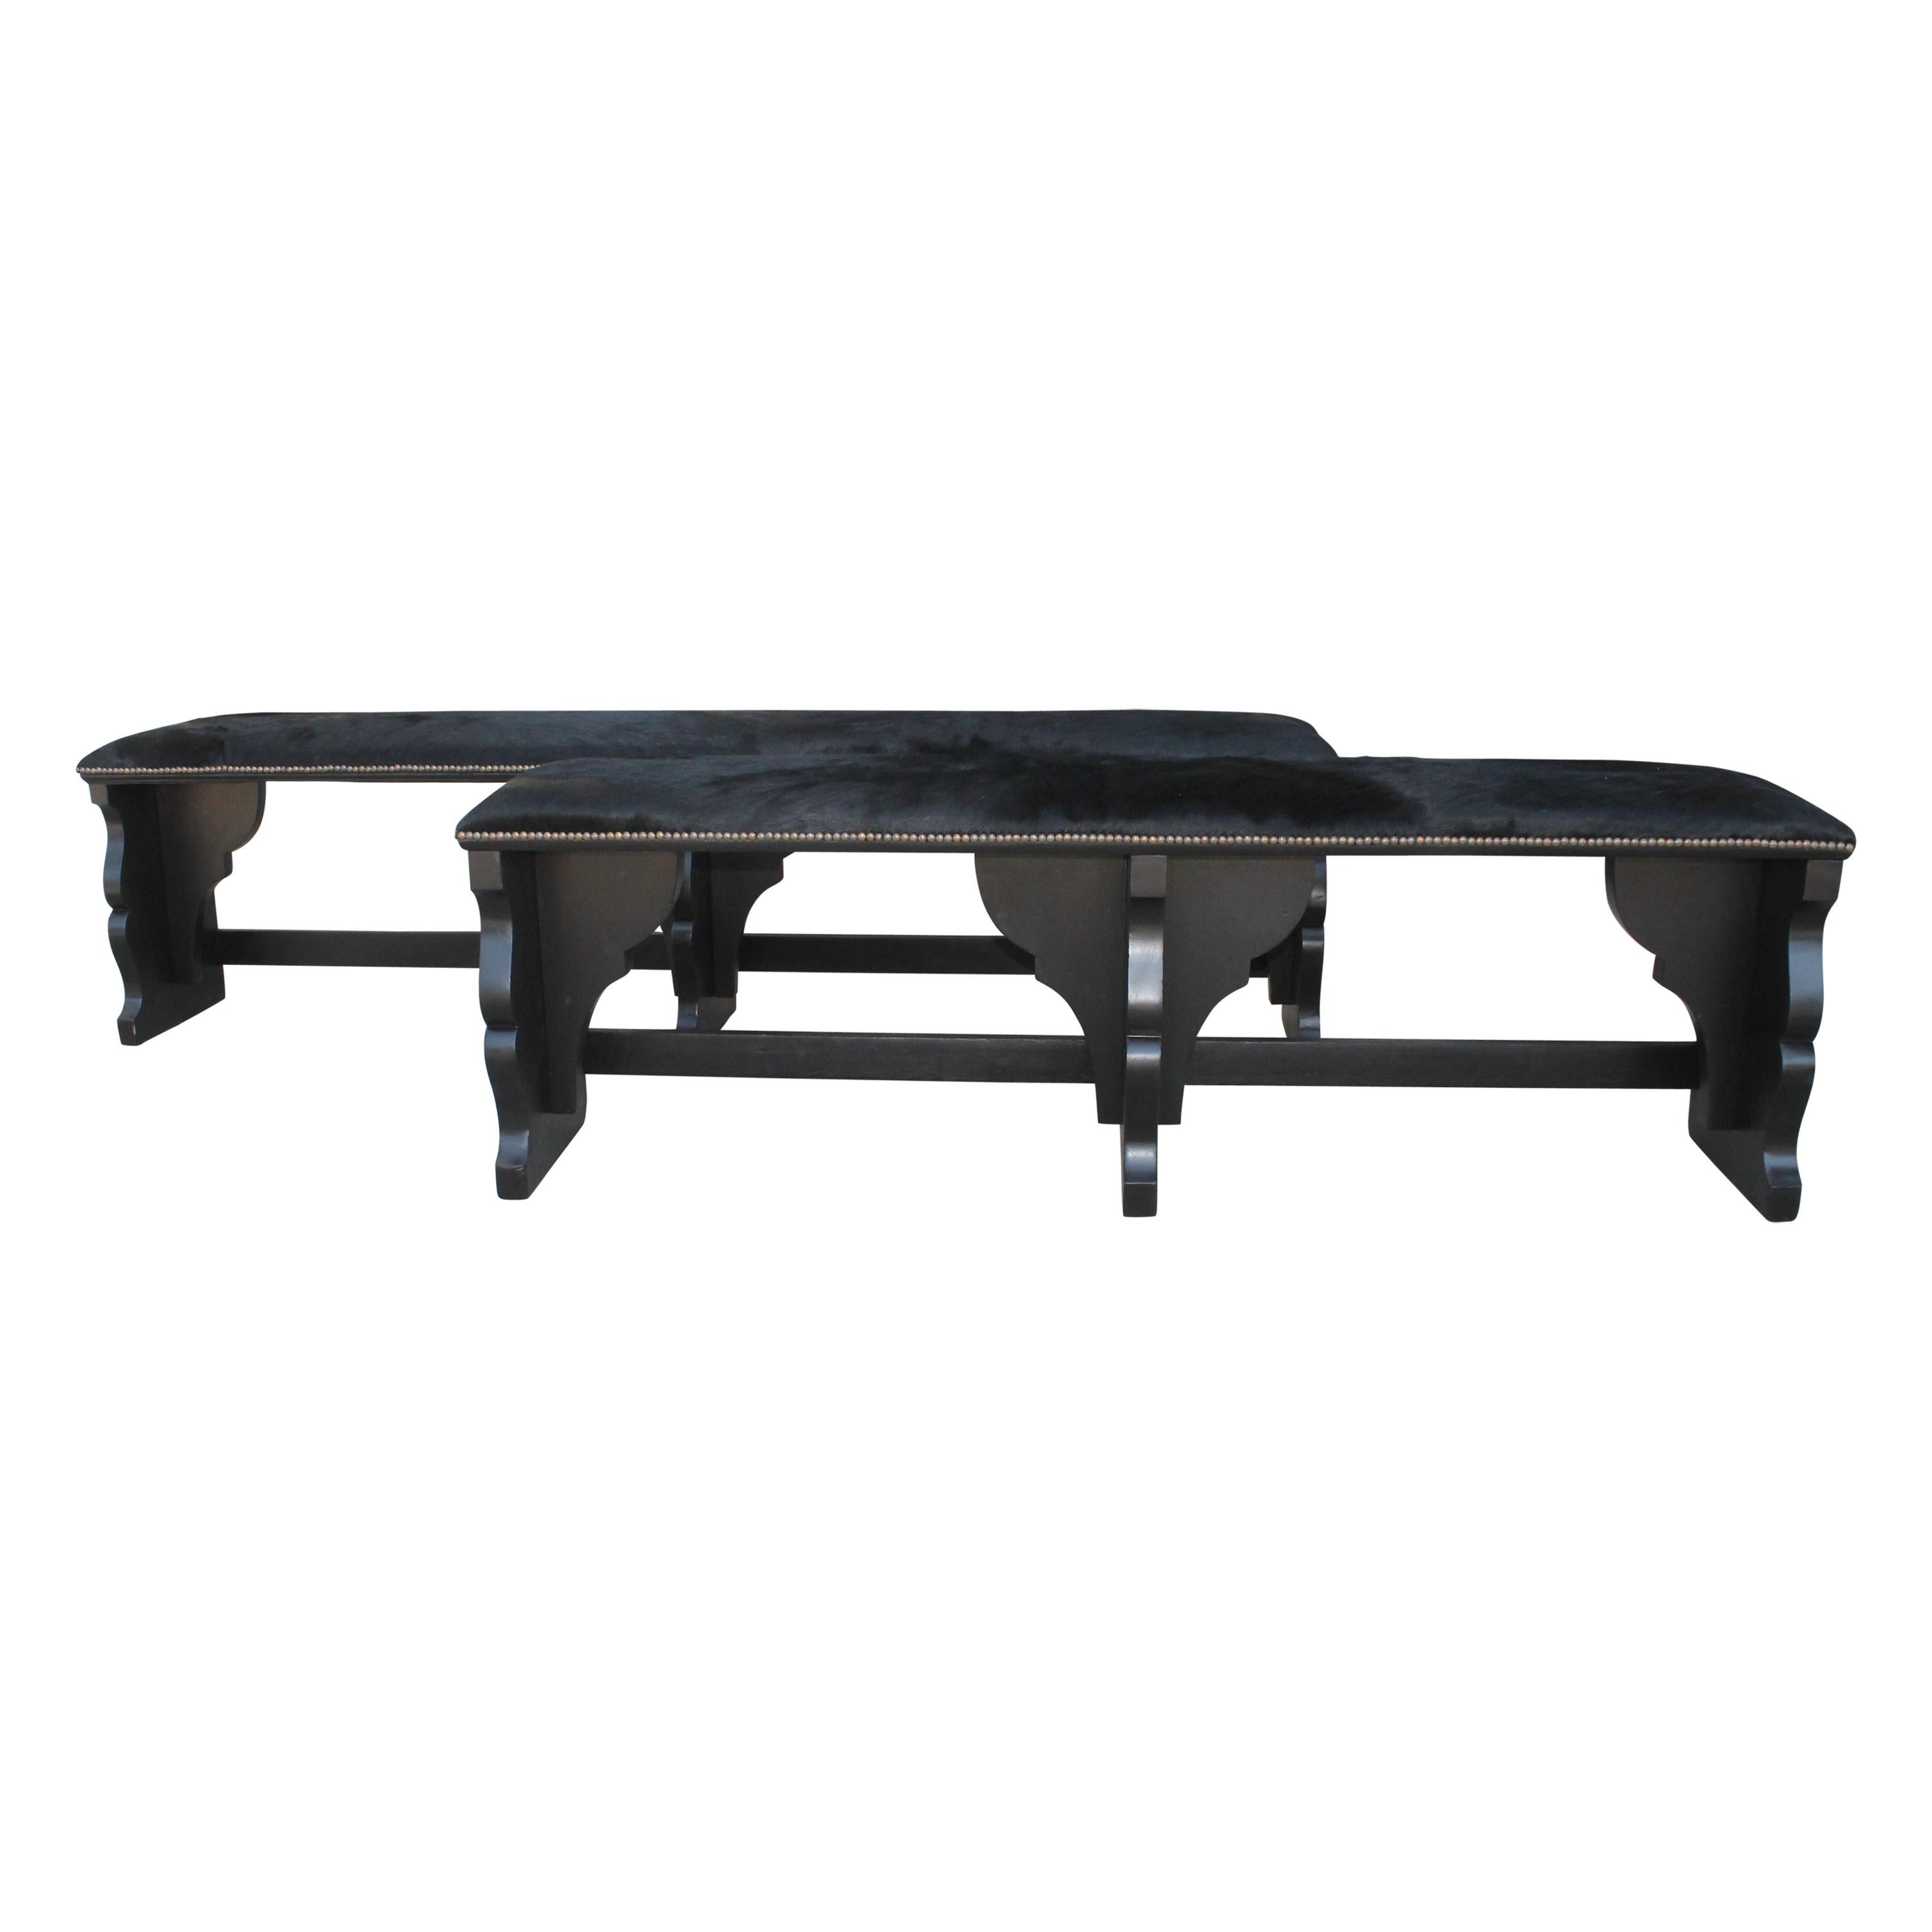  Pair of 19th Century Rustic Black Painted Cowhide Benches